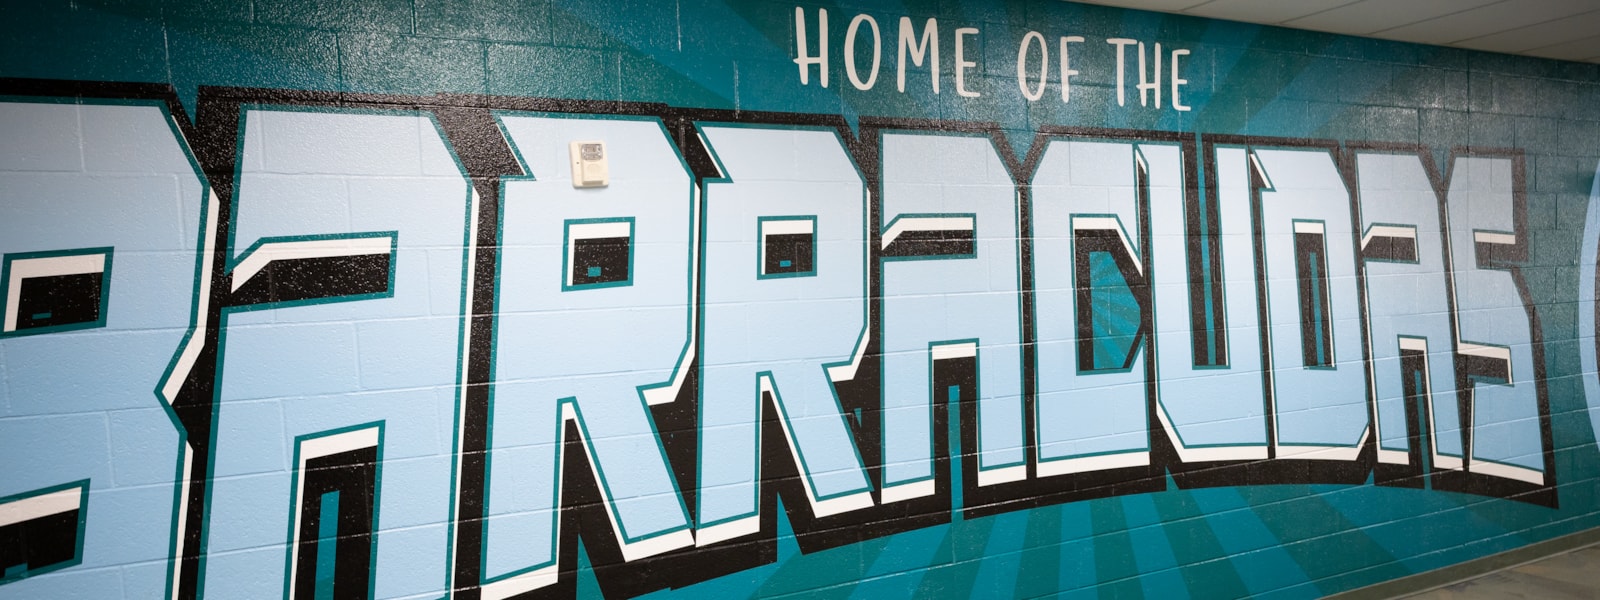 wall wrap on school wall saying home of the barracudas